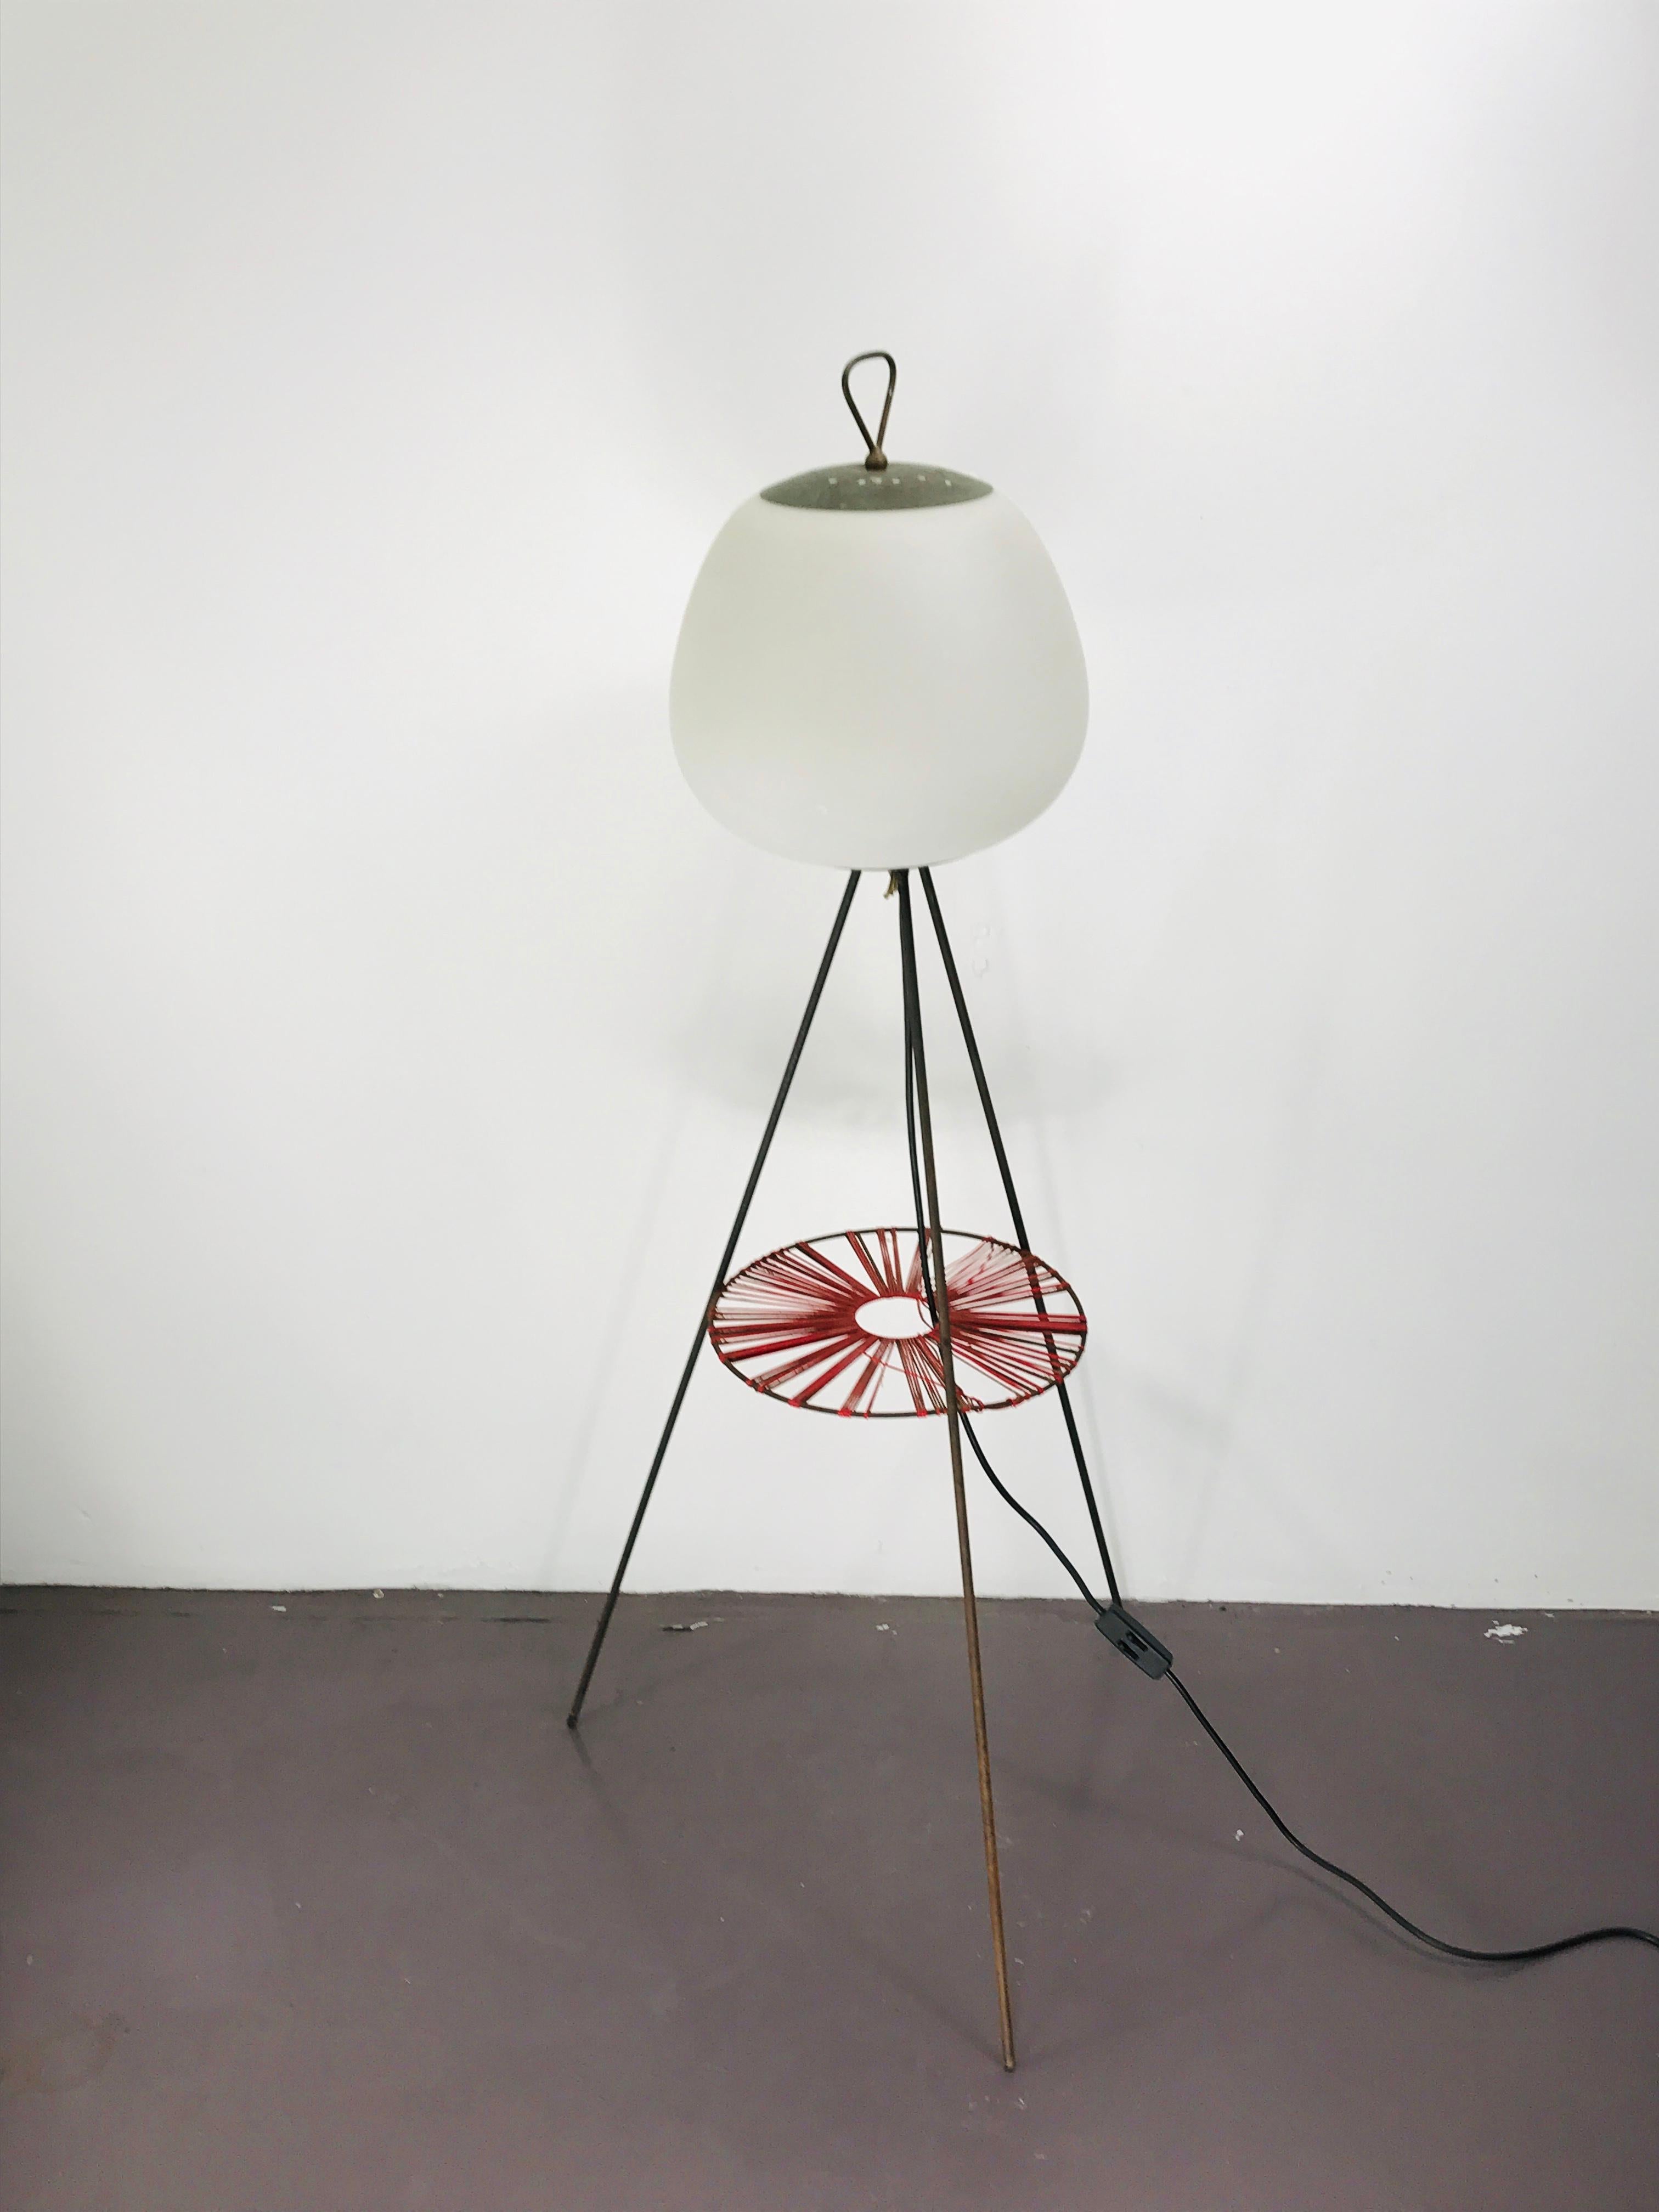 Midcentury Italian Floor Lamp in Glass and Metal Red and Blue Light, 1950 For Sale 7